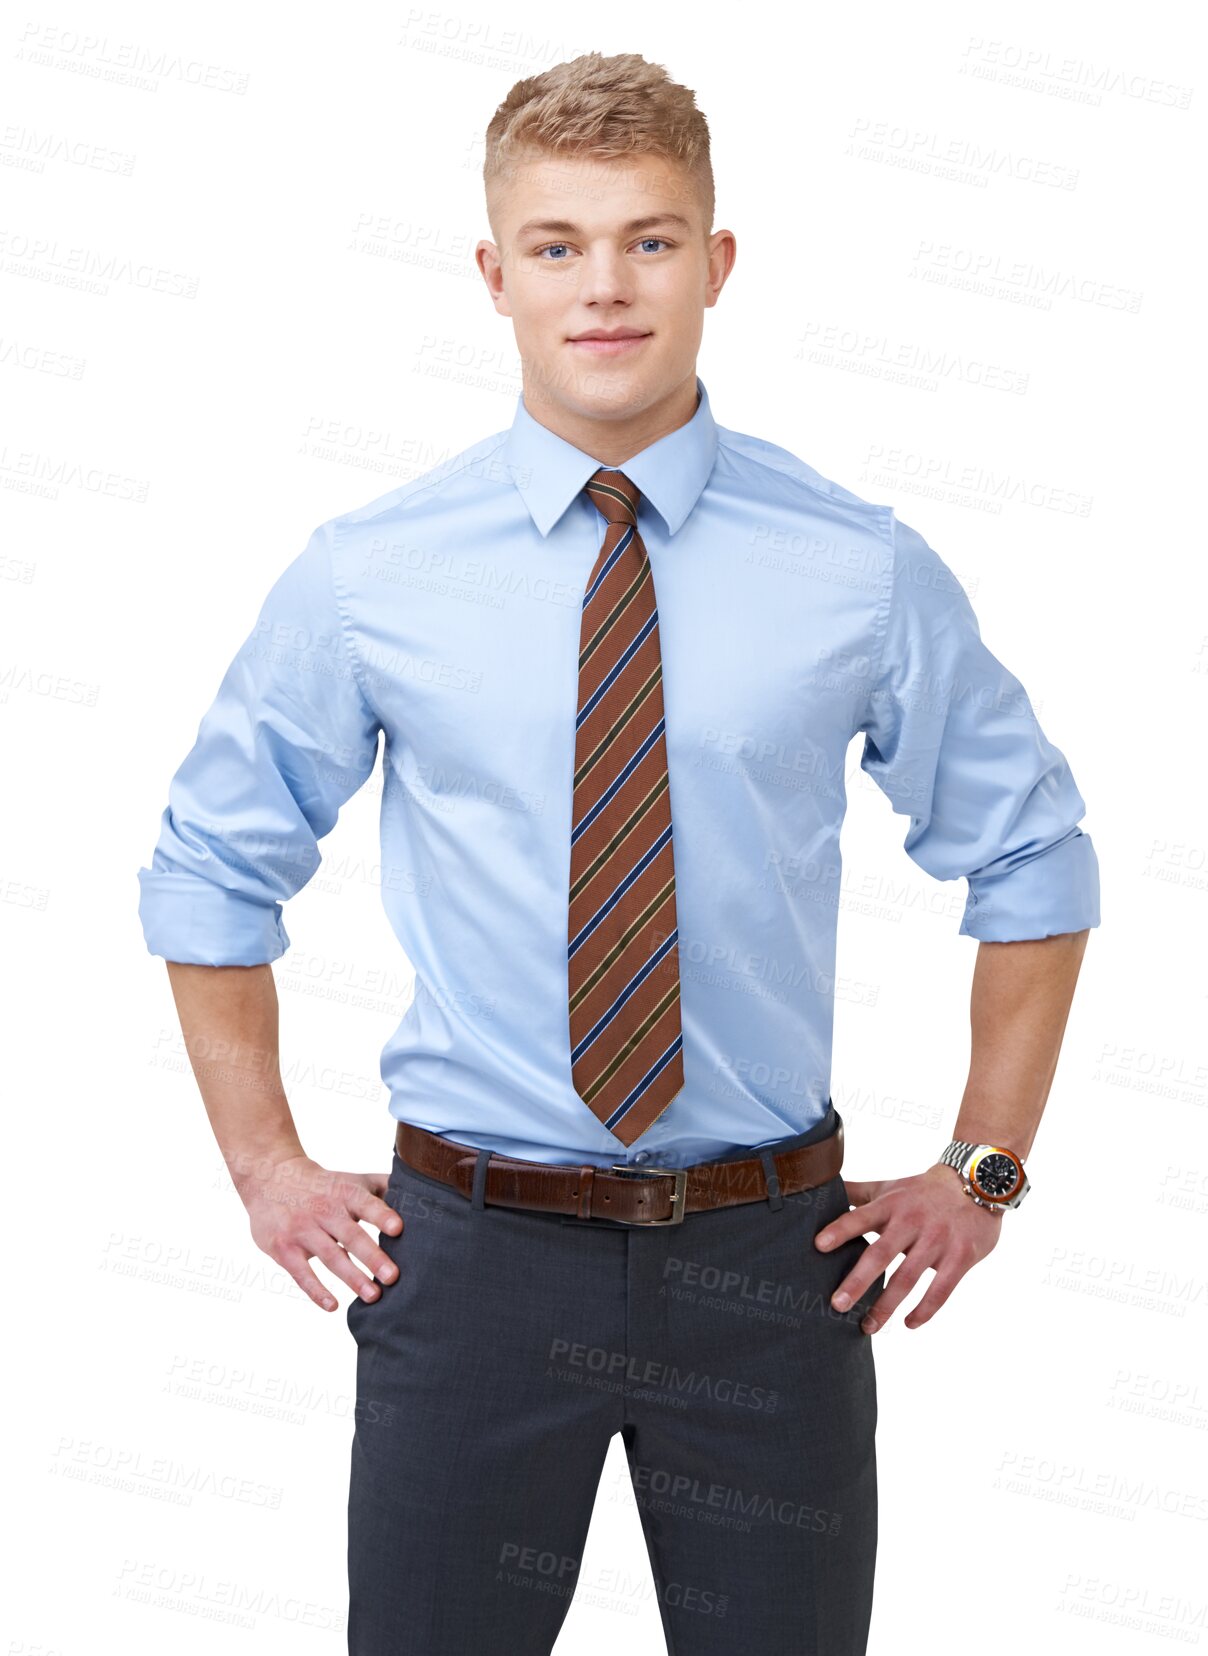 Buy stock photo Portrait, business and salesman with confidence for career in png or isolated and transparent background. Male professional, success and hand on hip with shirt for entrepreneur or employee with tie.